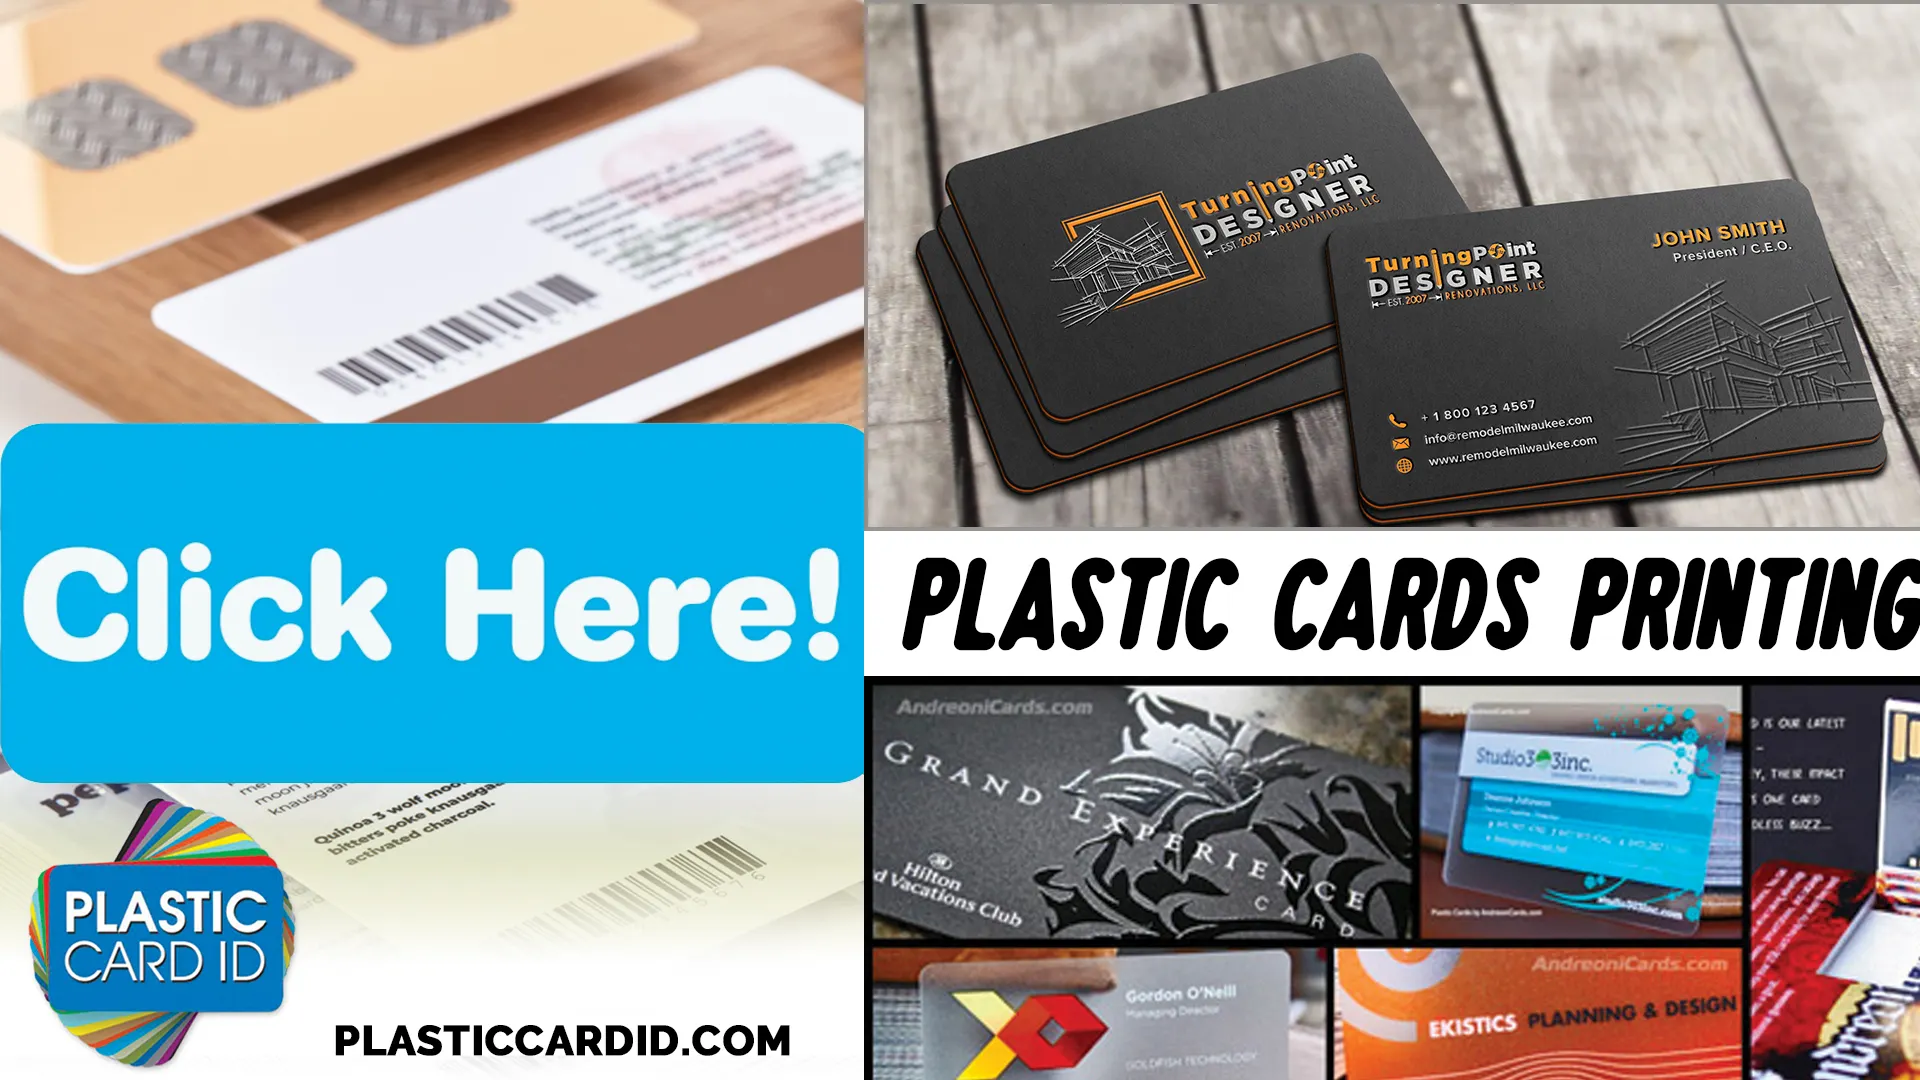 Your Partner in Plastic Card Printing